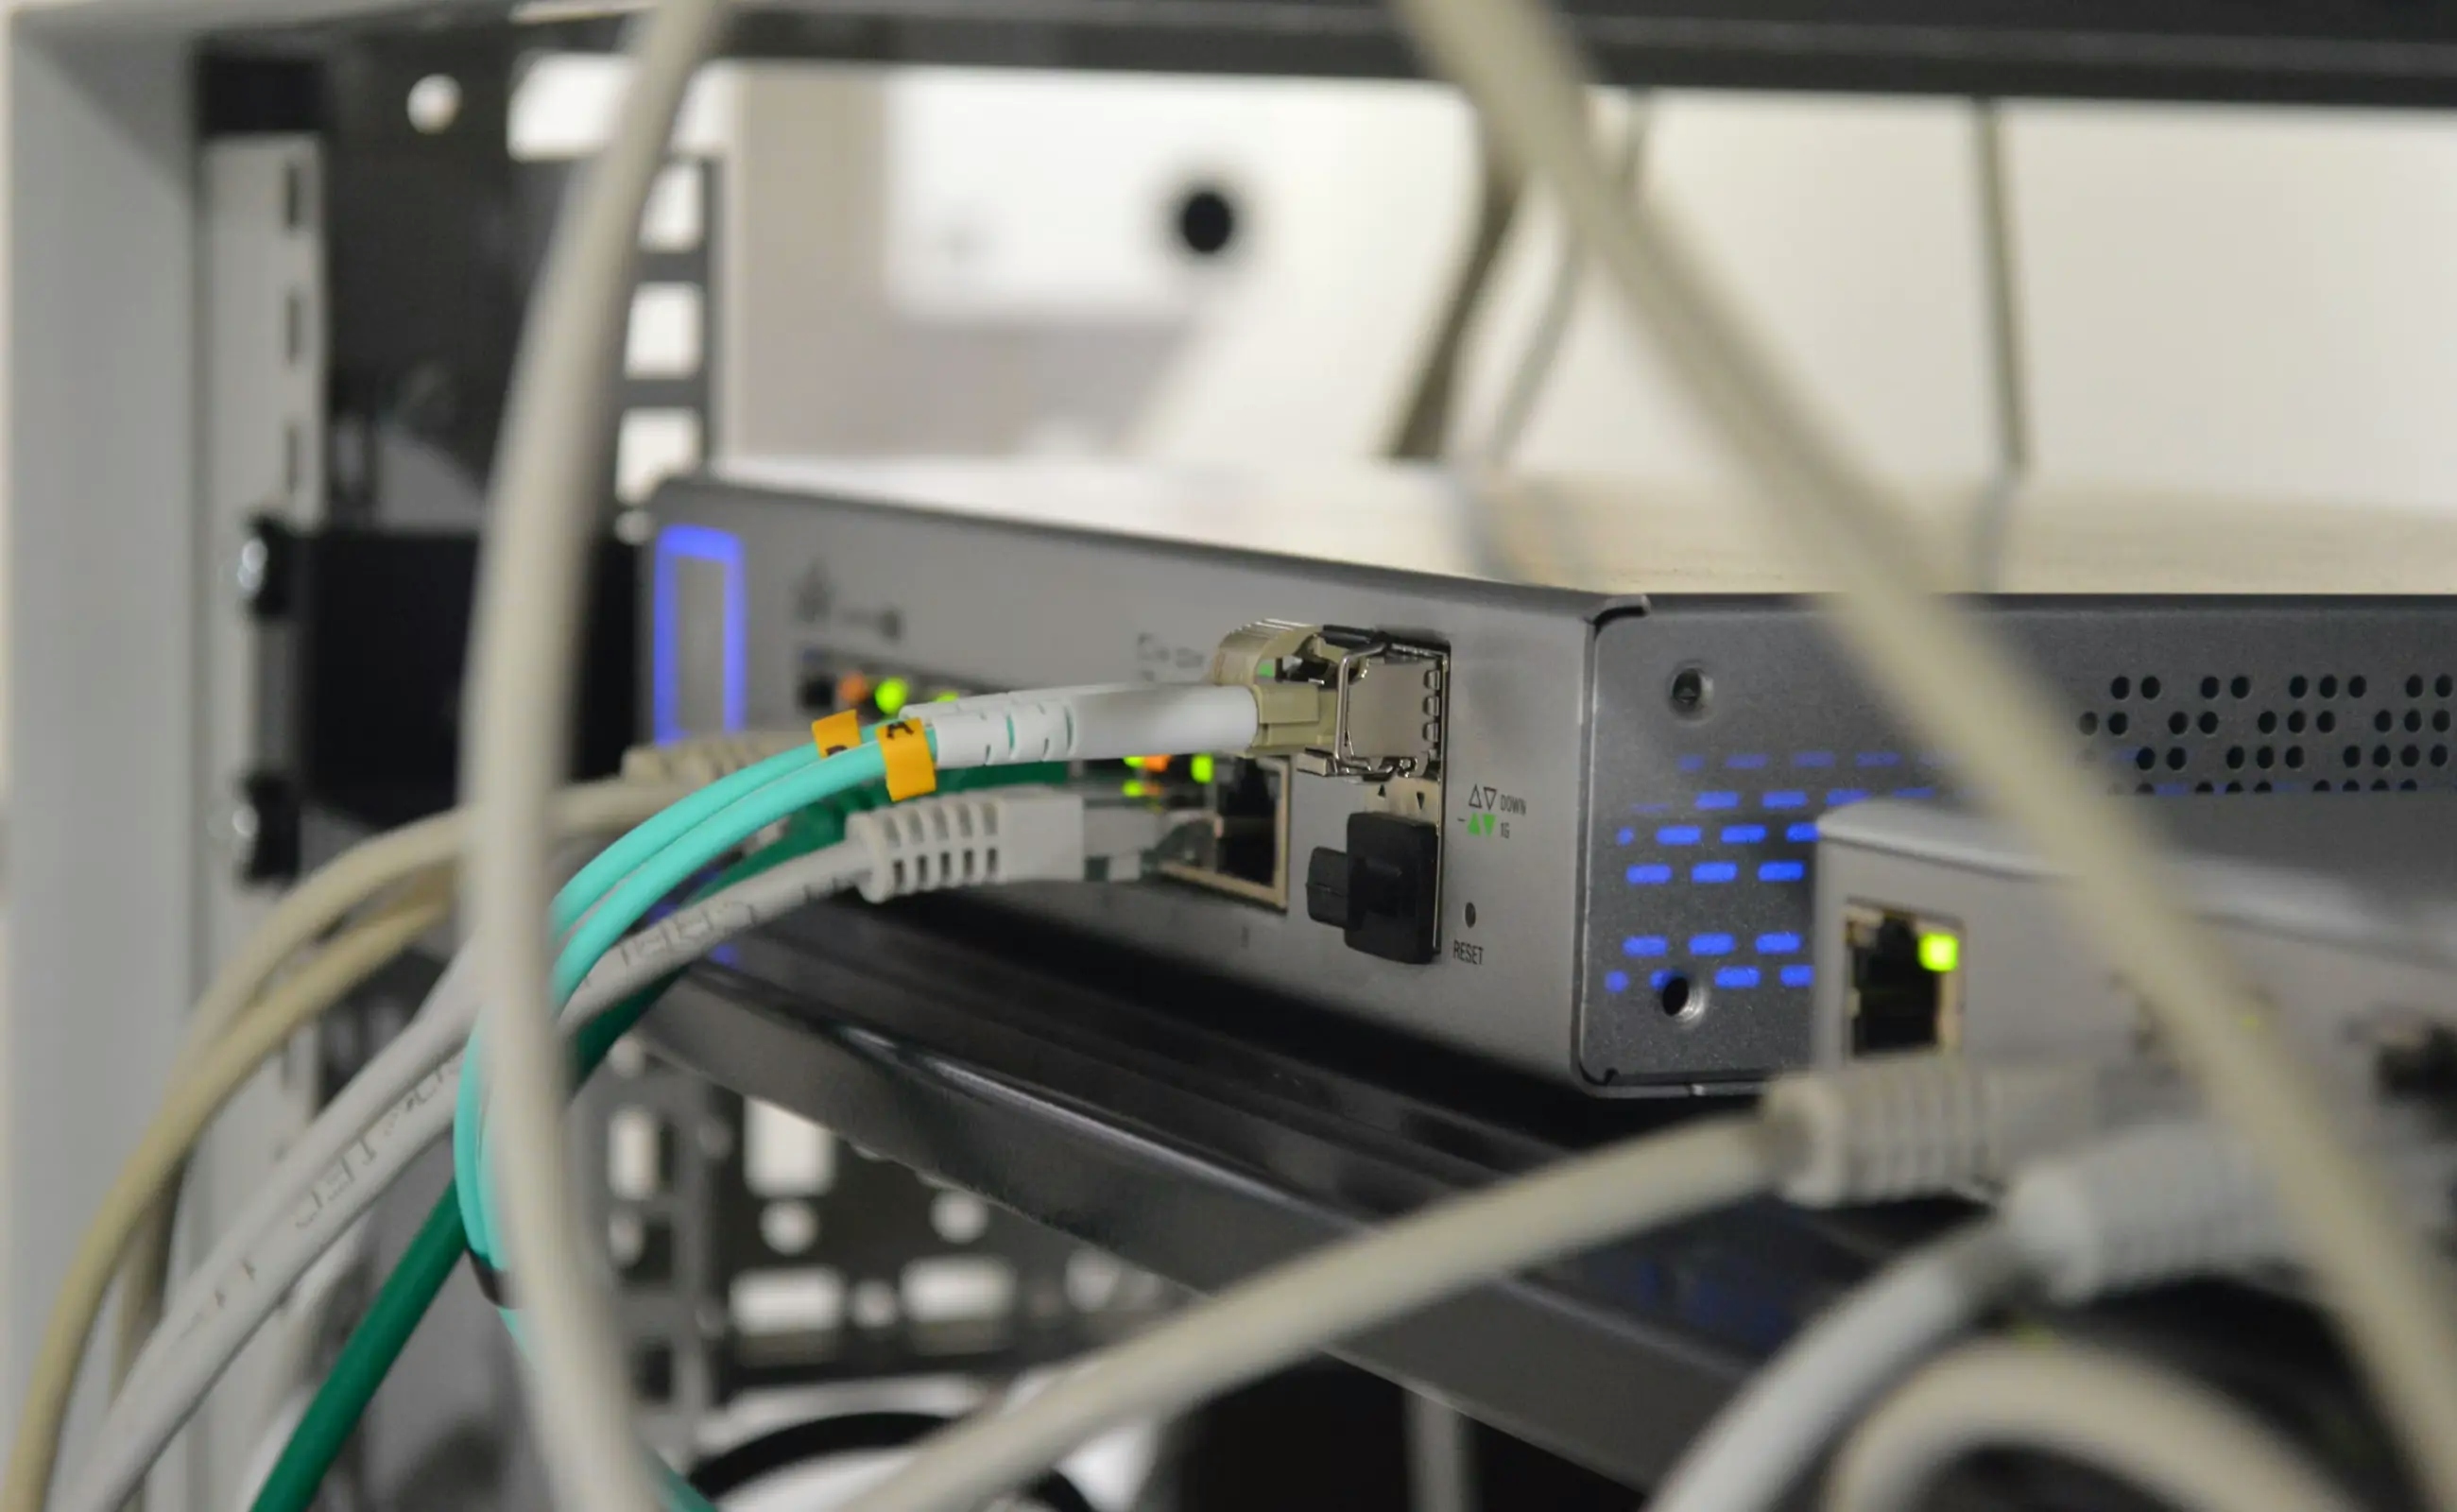 Ethernet & fiber cables connected to Ubiquity router